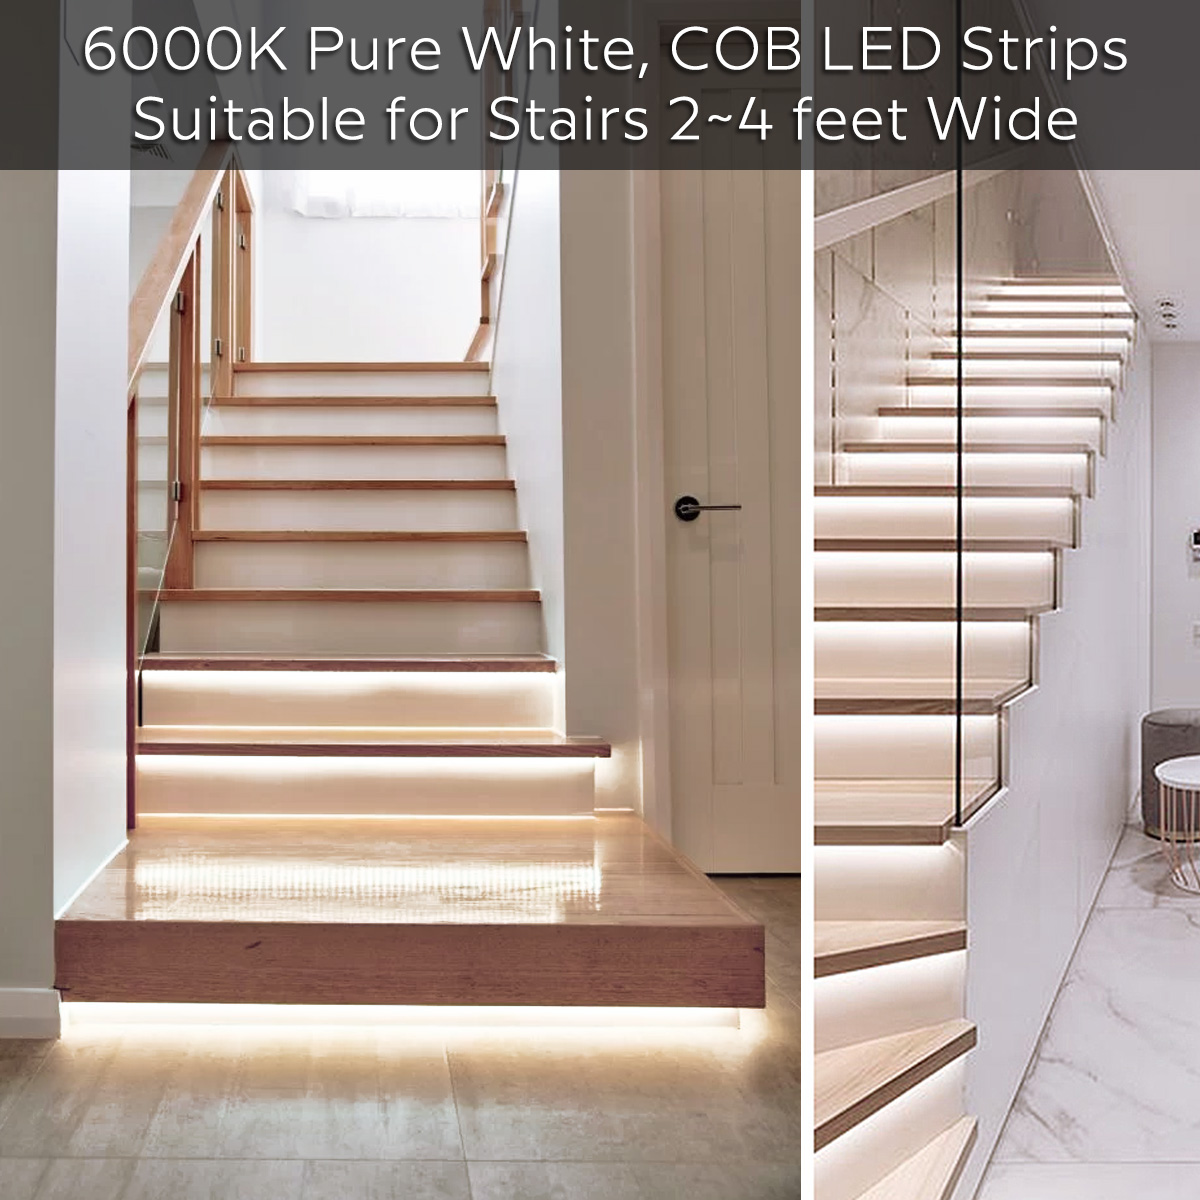 Staircases Lighting with LED strips - How to illuminate a staircase